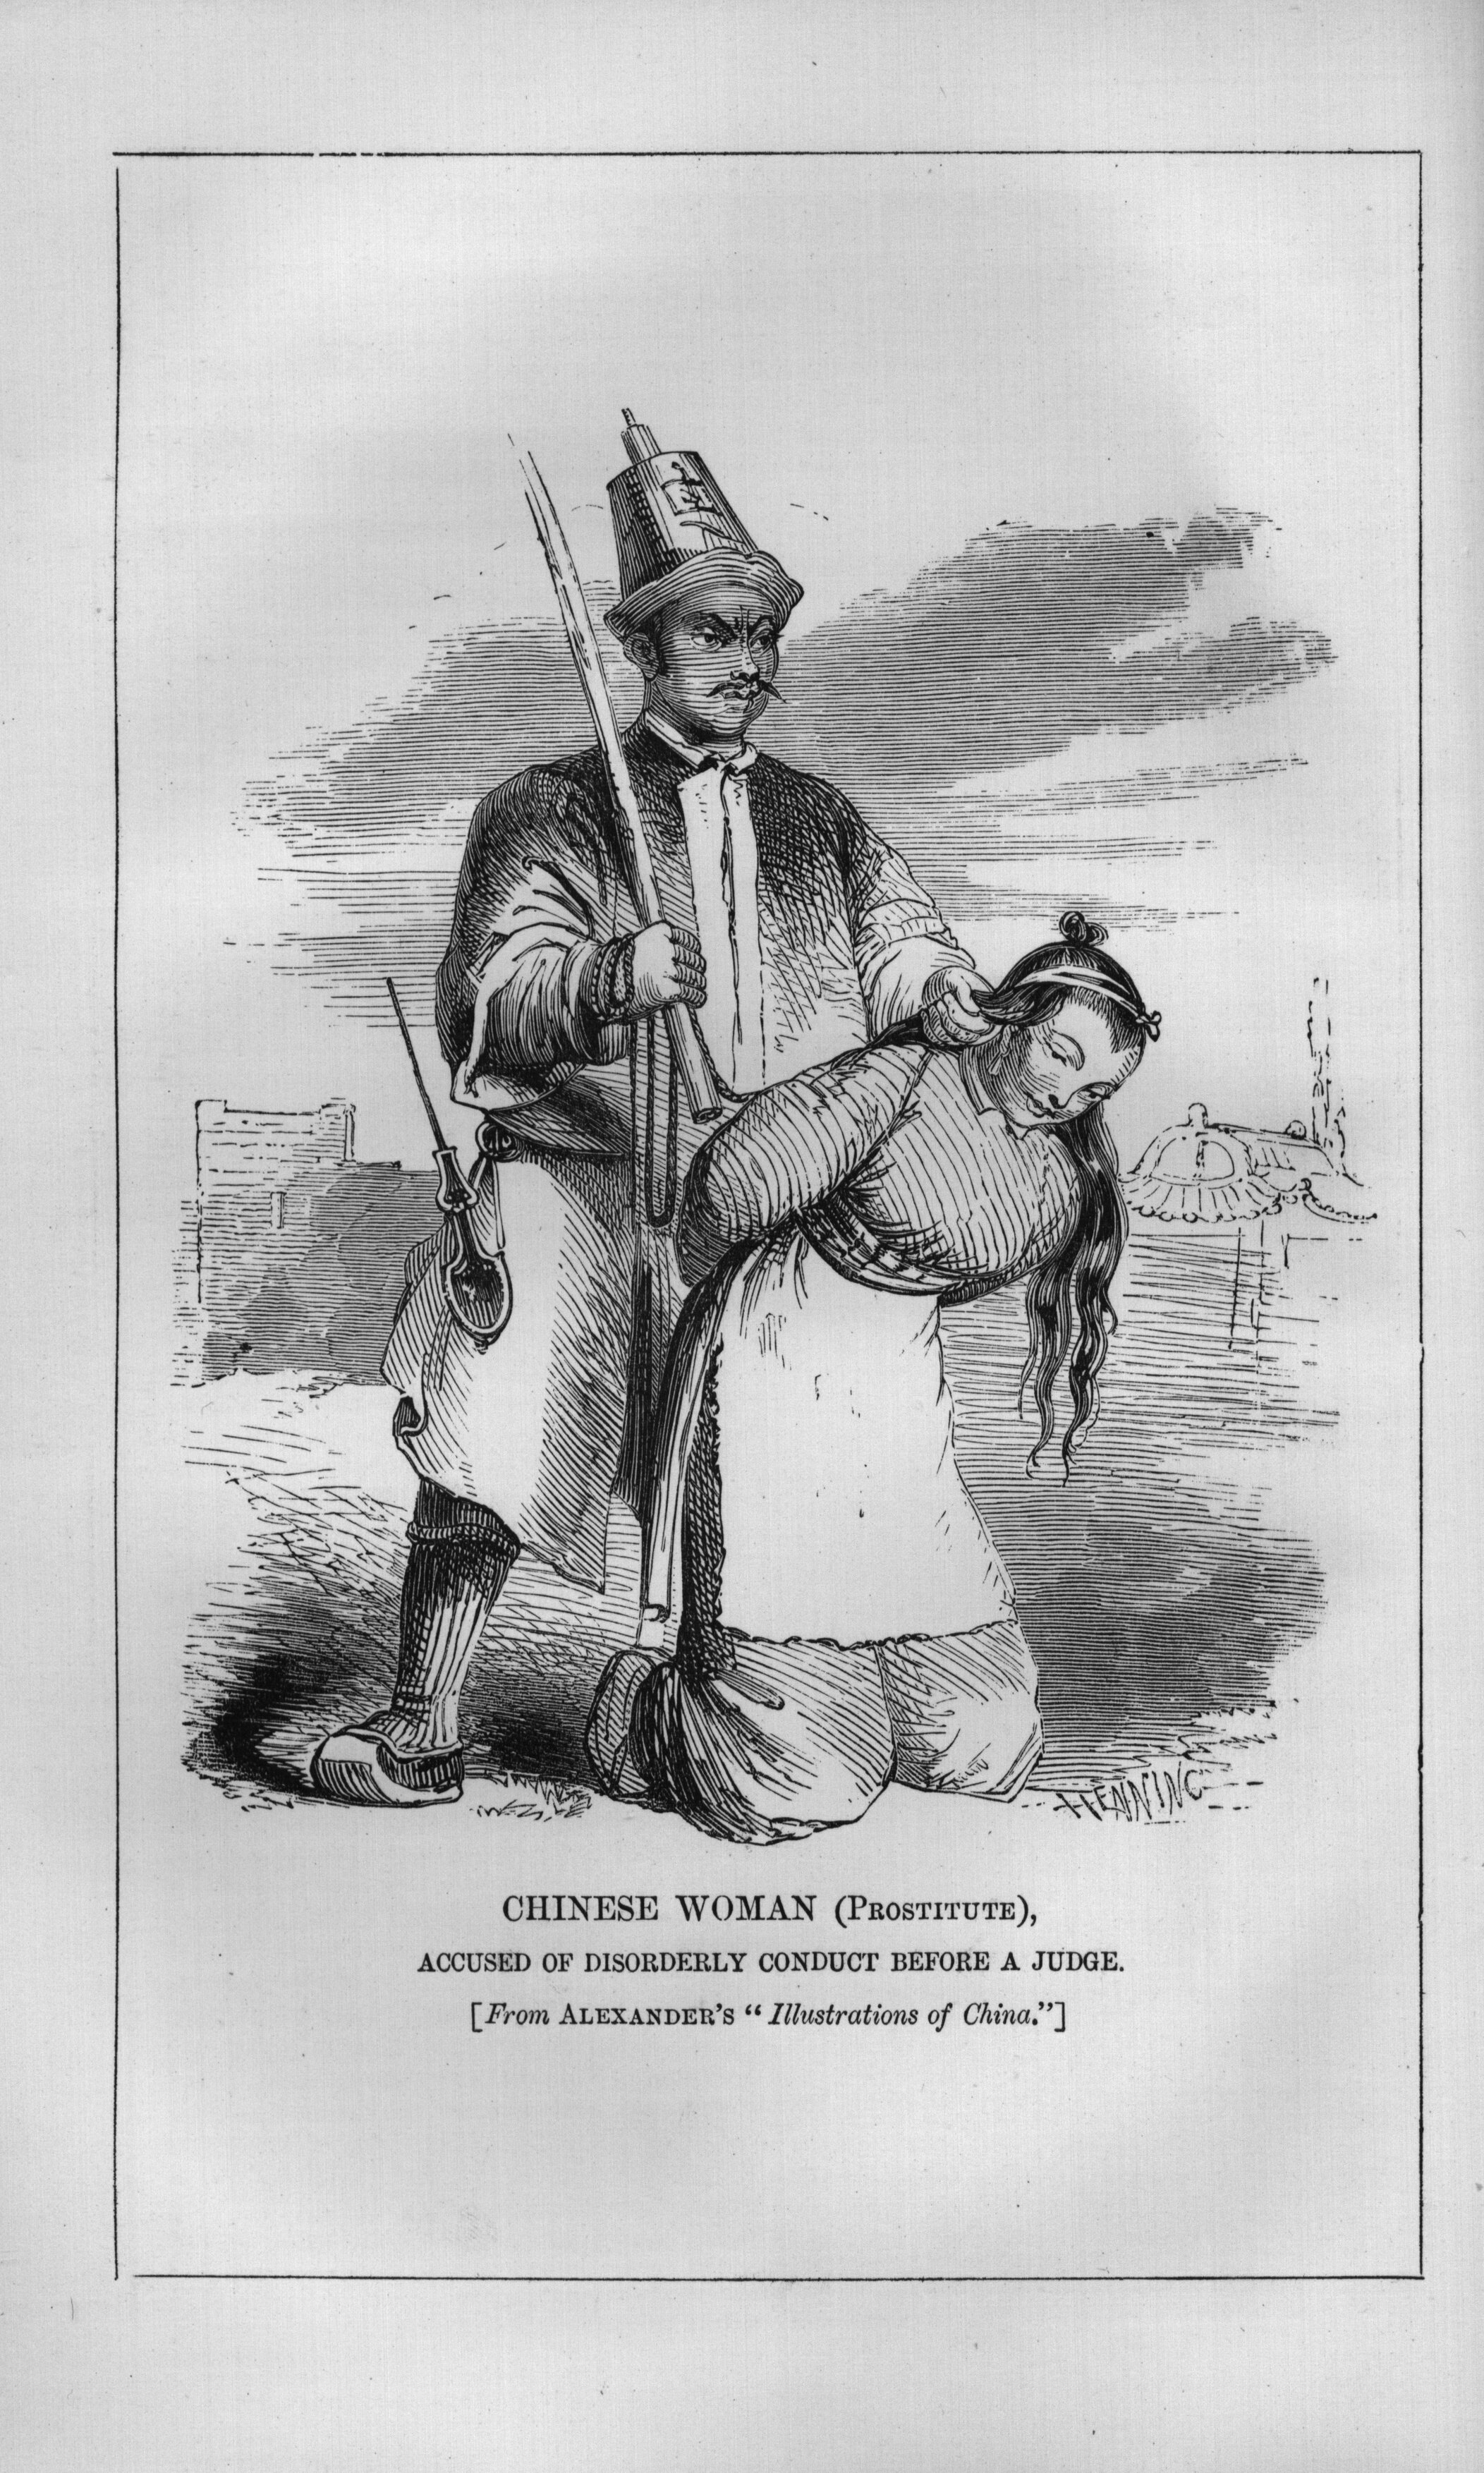 https://upload.wikimedia.org/wikipedia/commons/7/7f/Chinese_Woman_%28Prostitute%29%2C_Accused_of_Disorderly_Conduct_Before_a_Judge_%28reprinted_from_William_Alexander%27s_Illustrations_of_China%29.jpg